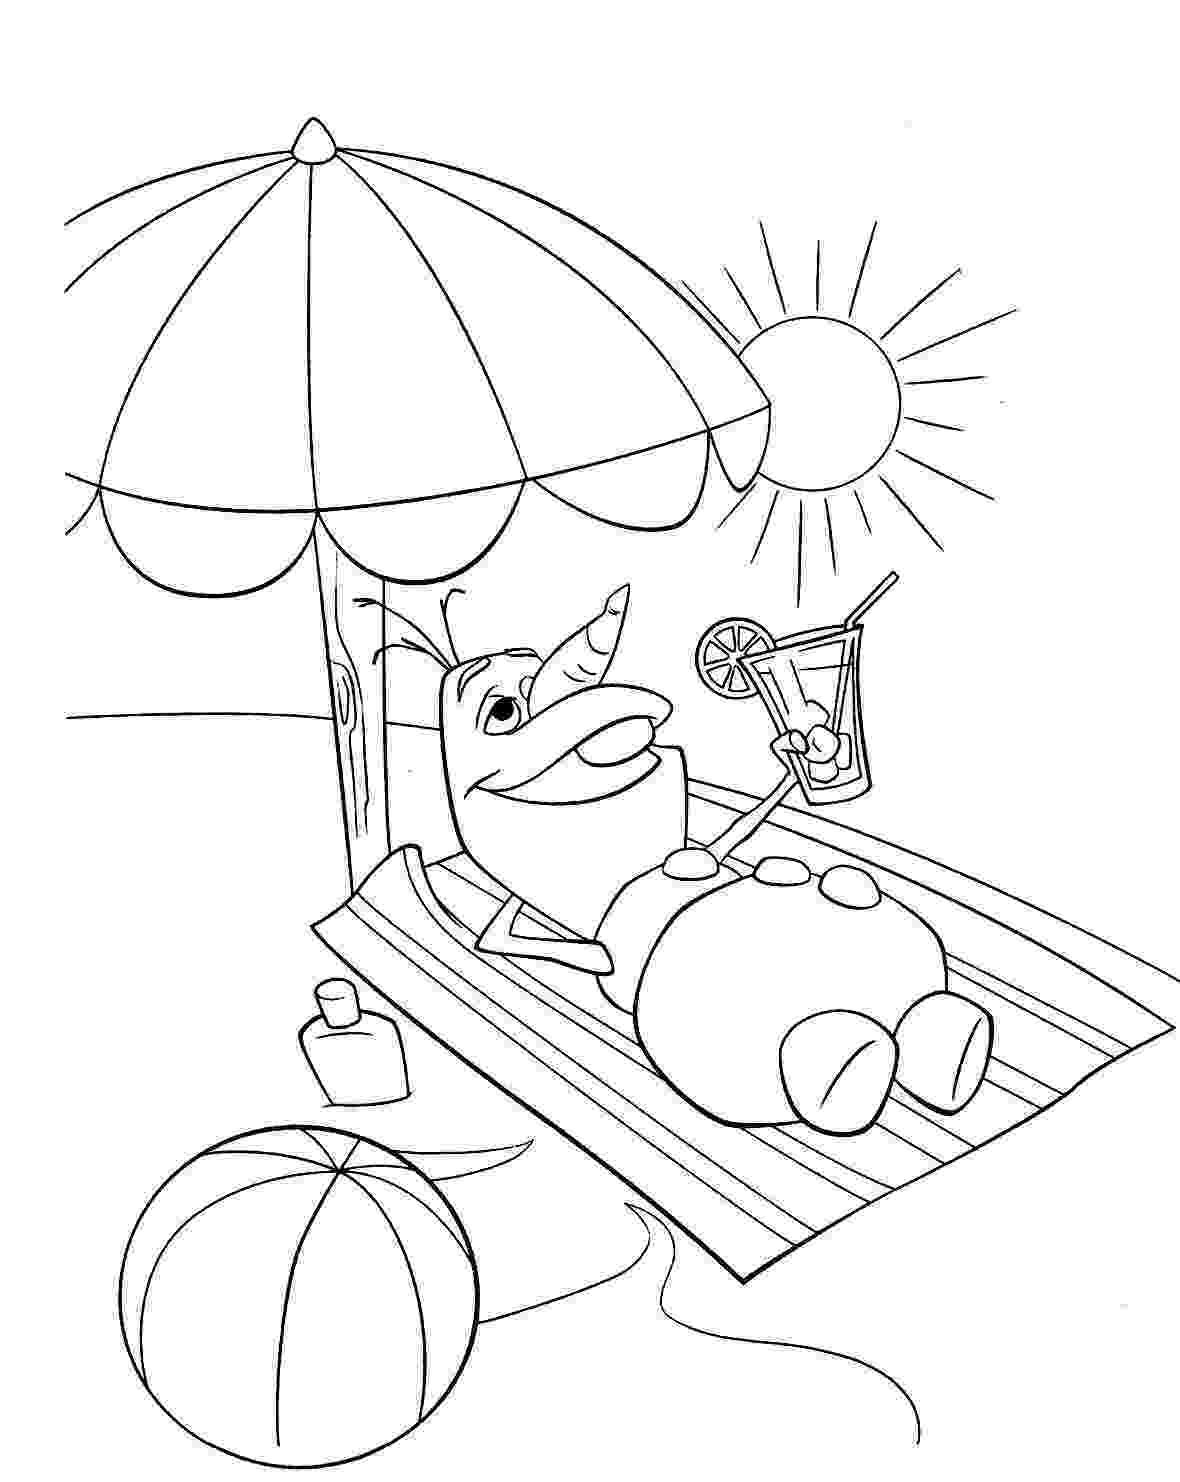 summer coloring sheets vacation in summertime coloring page for kids seasons coloring summer sheets 